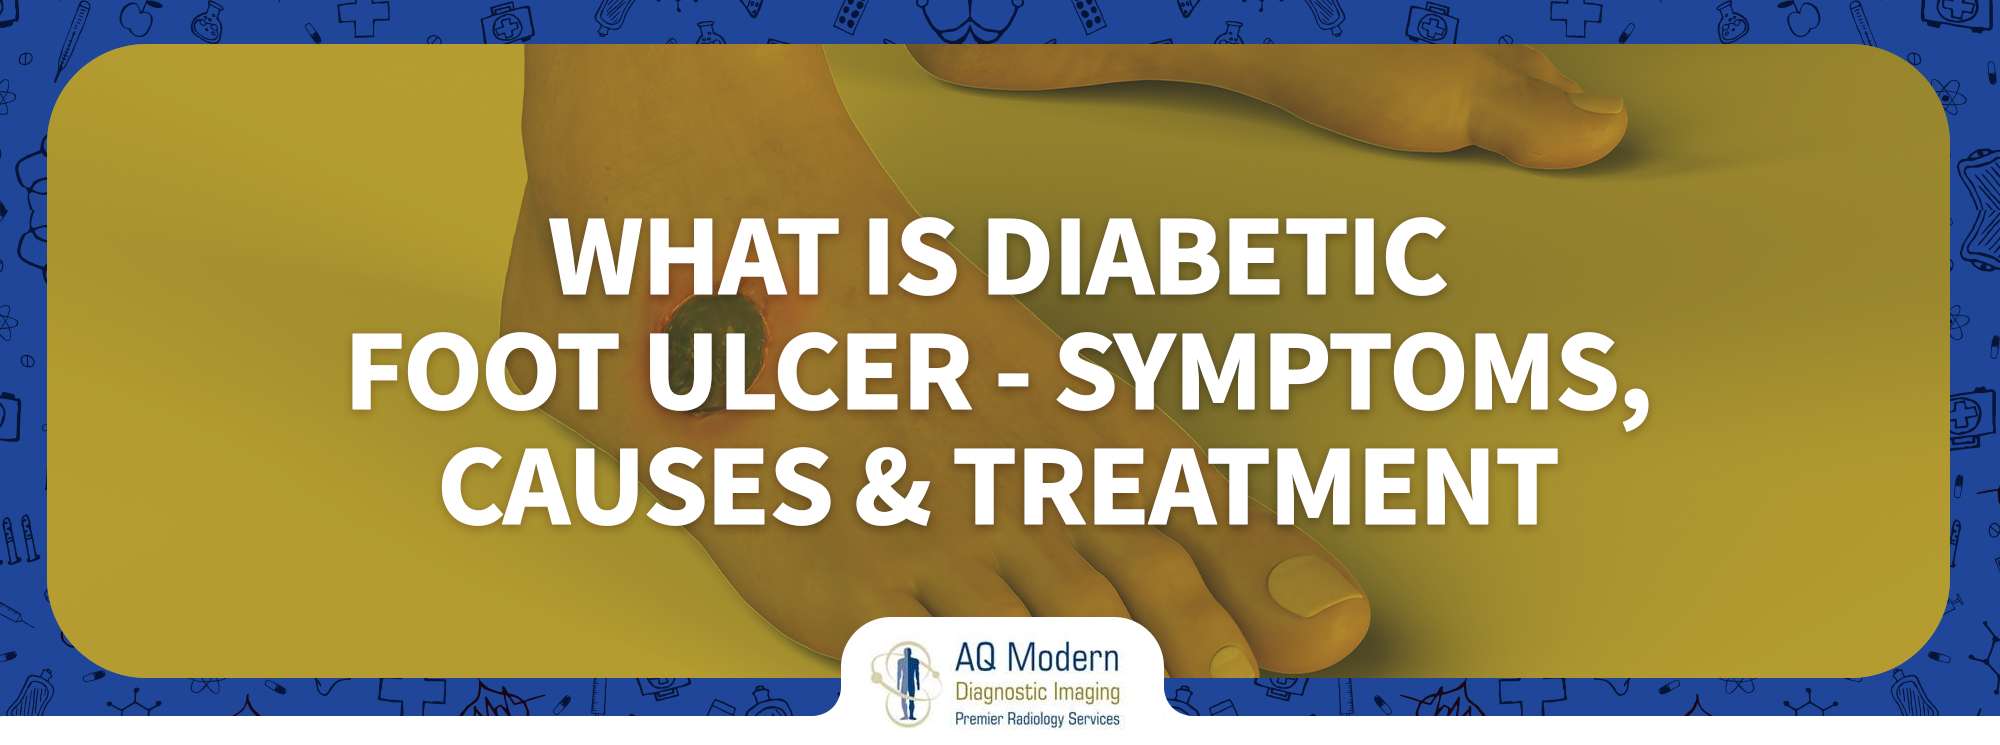 Diabetic foot ulcers: Why they're dangerous and how to prevent them